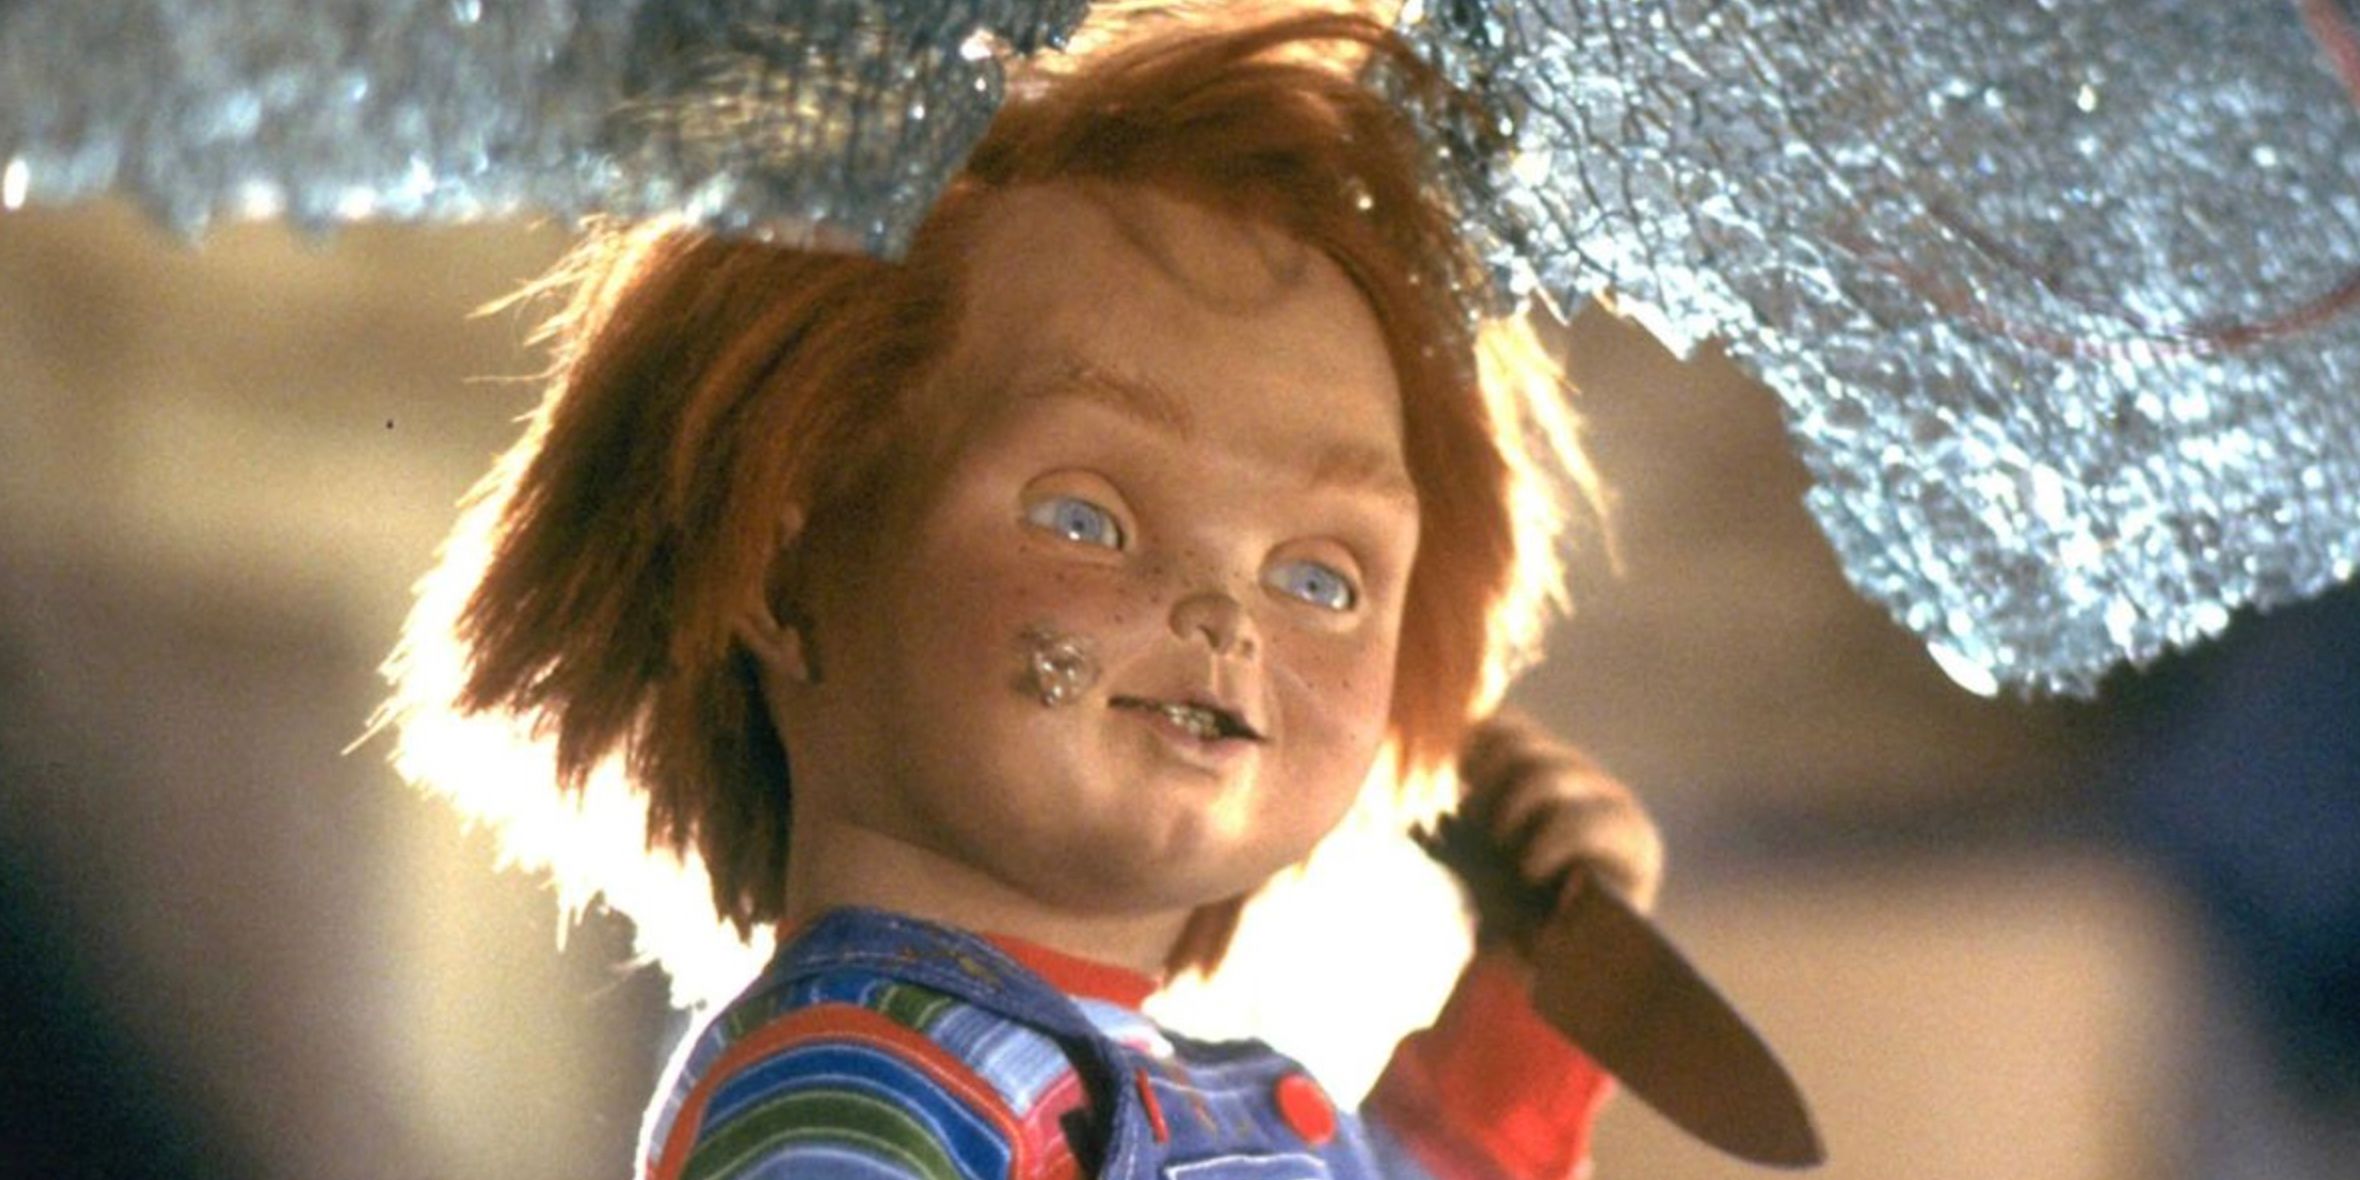 Chucky holding a knife in front of broken glass in Childs Play 2